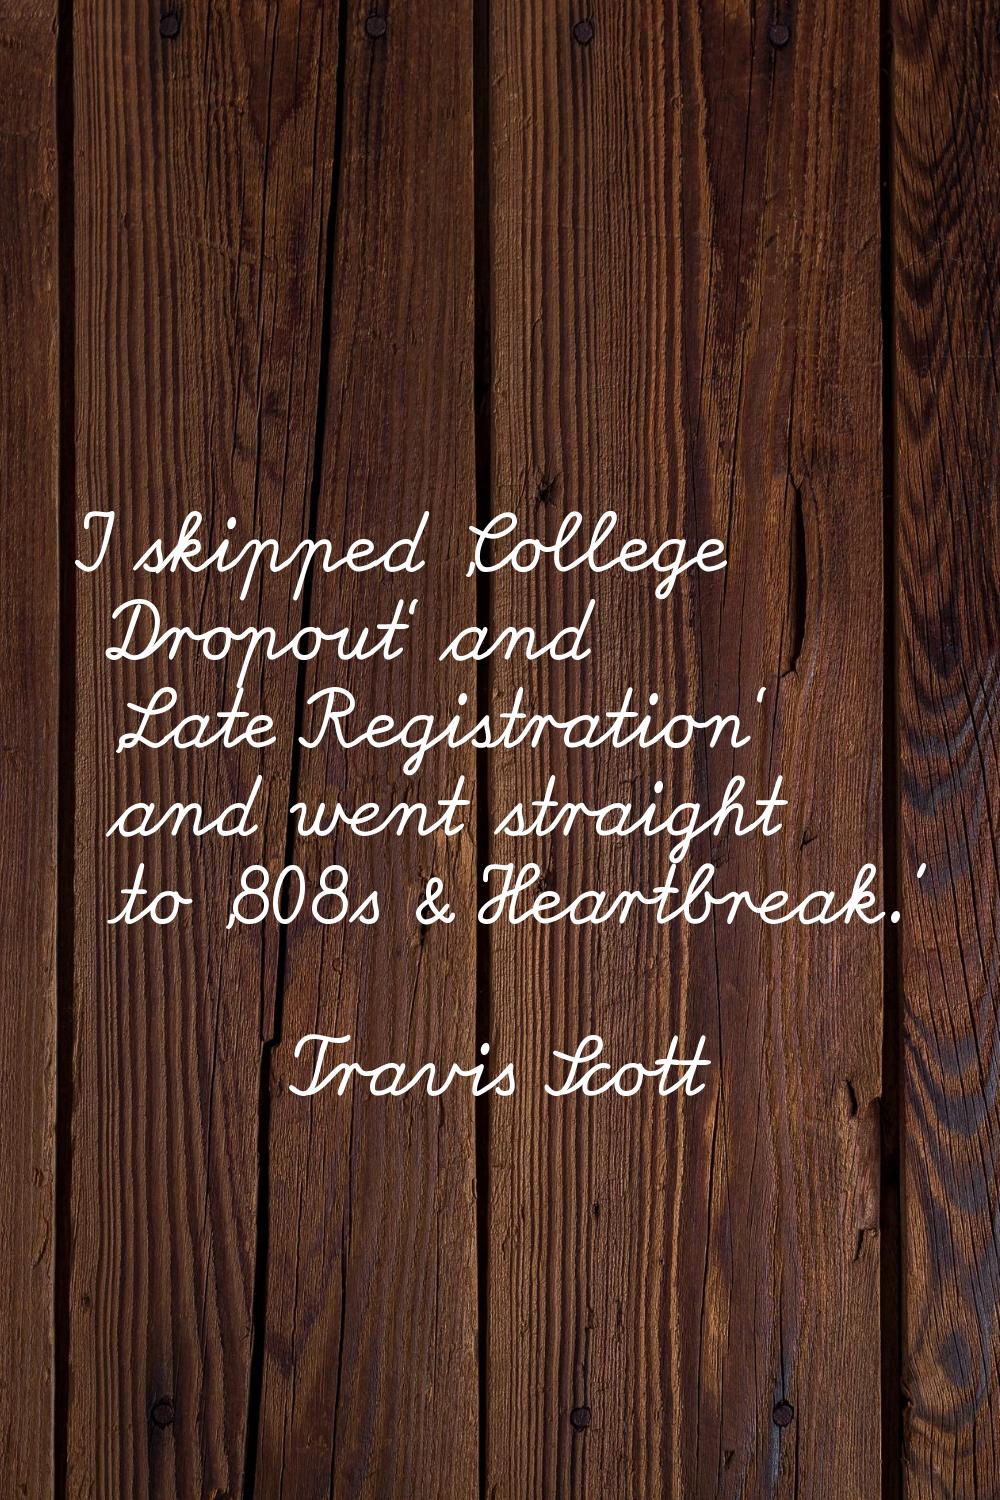 I skipped 'College Dropout' and 'Late Registration' and went straight to '808s & Heartbreak.'